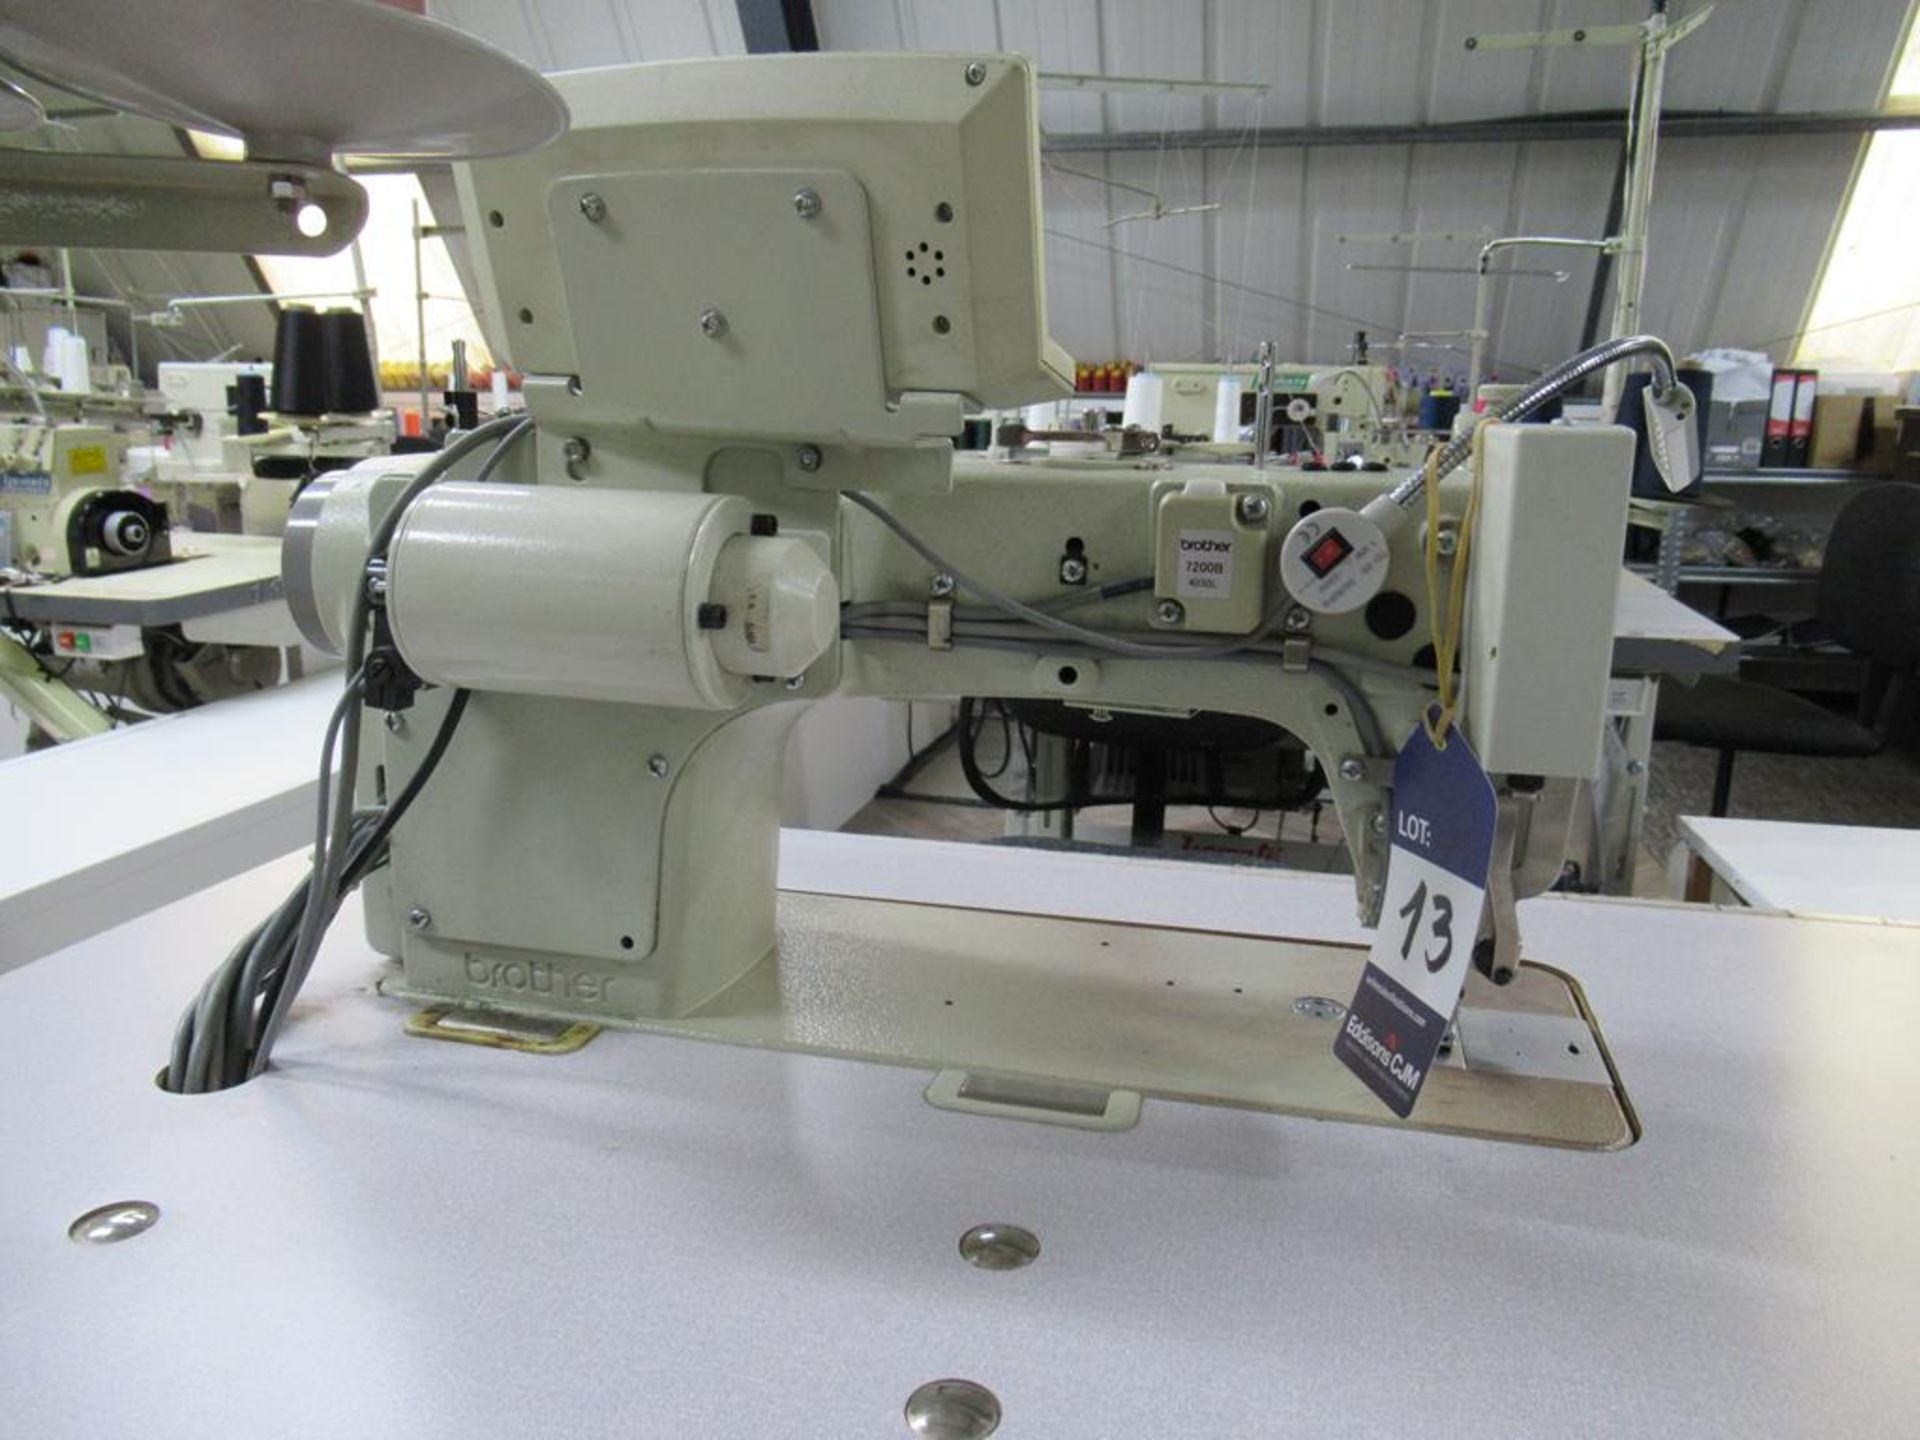 A Brother S-7200B- 403 Single Needle Direct Drive Straight Stitch Sewing Machine with Electronic Fee - Image 4 of 5